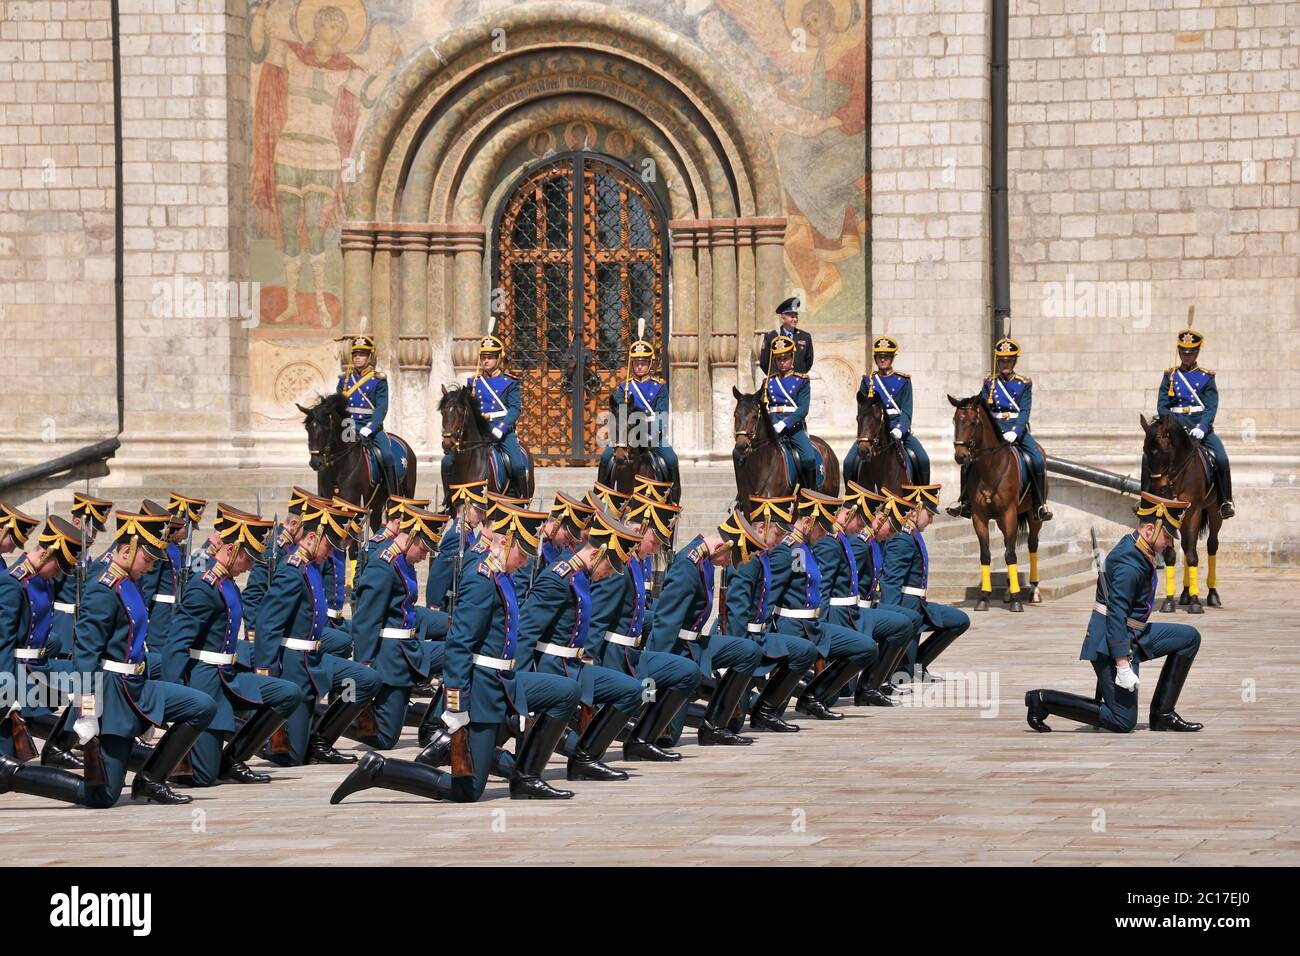 Taking a Bow - Soldiers of Kremlin Regiment during military parade on Cathedral Sqaure in Moscow Kremlin Stock Photo